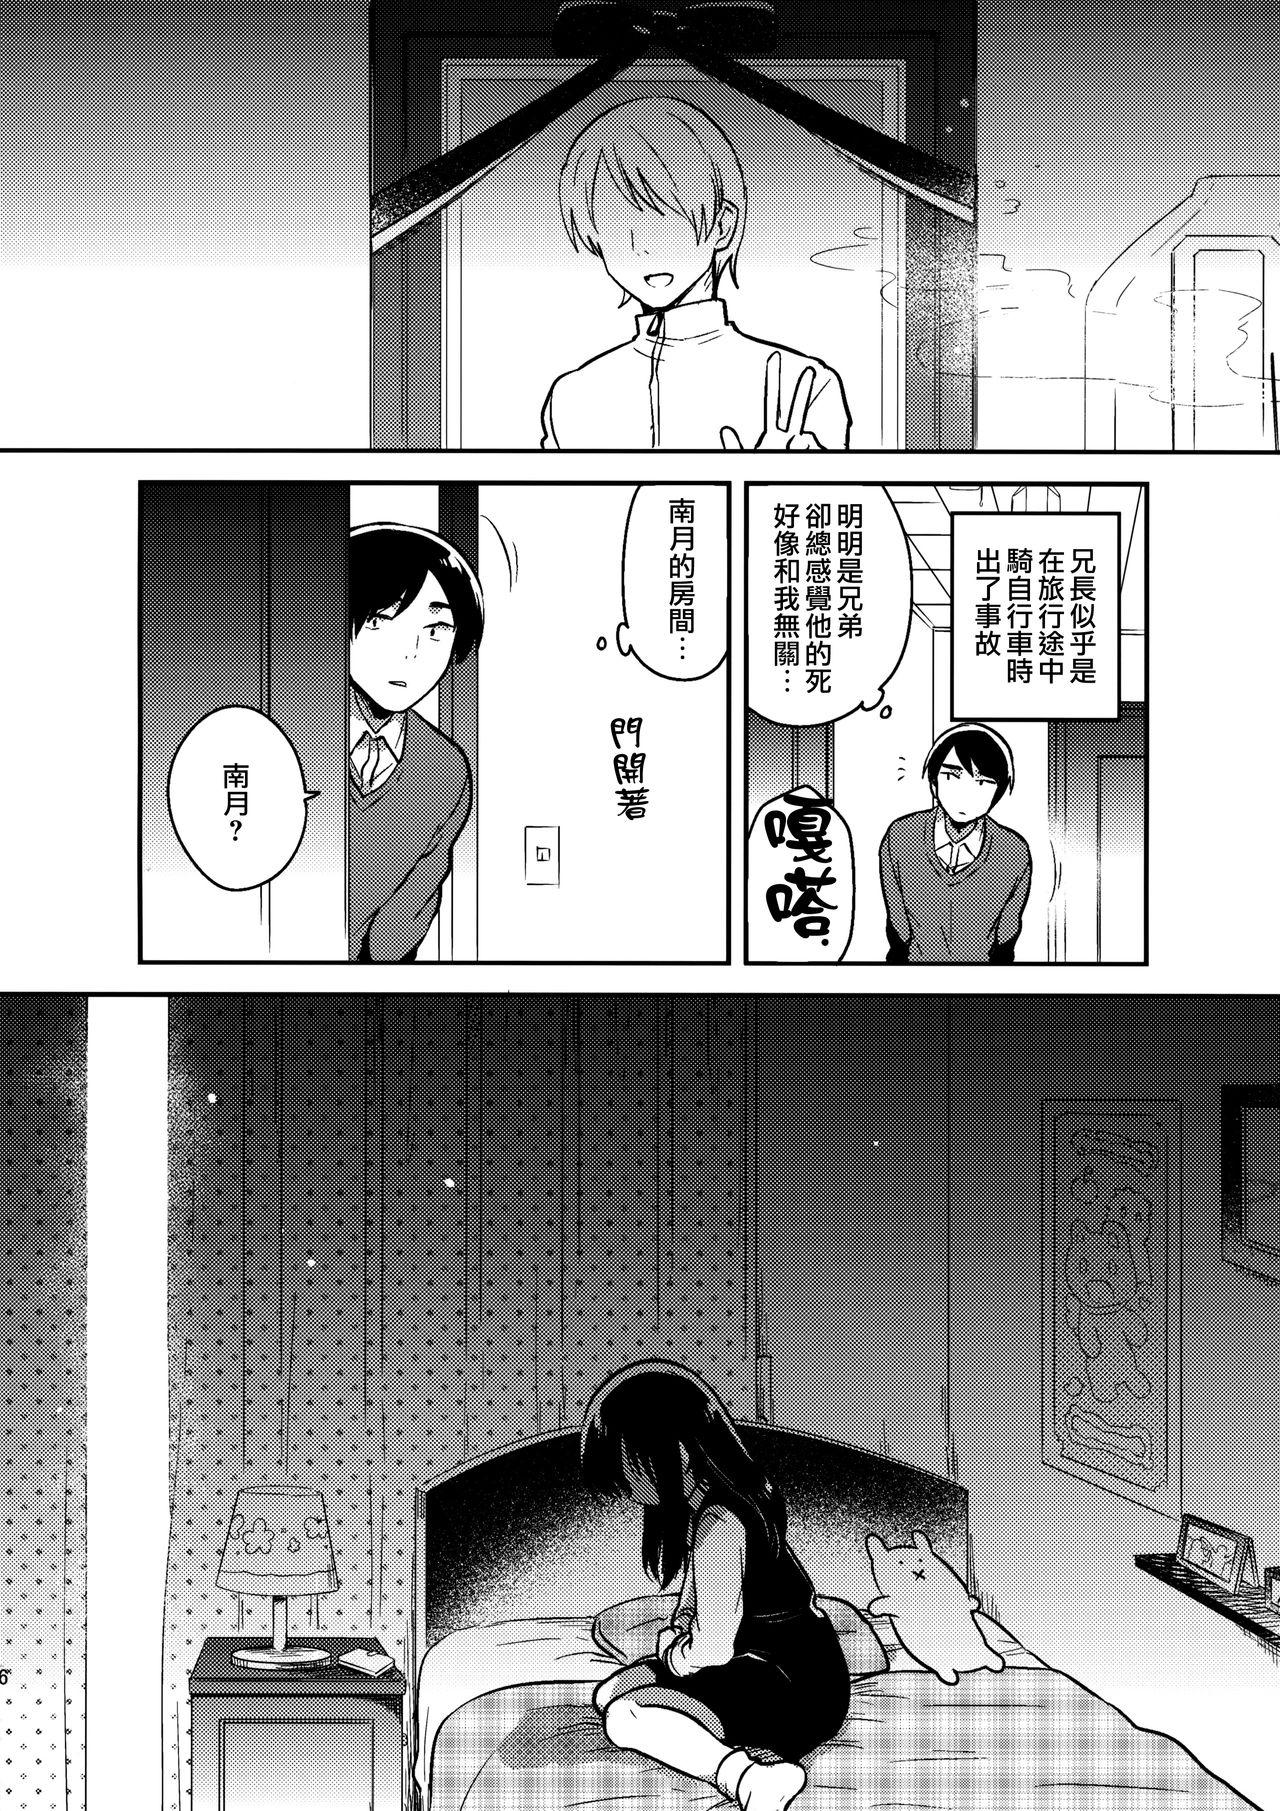 Blowing Onii-chan no Osoushiki Gays - Page 6